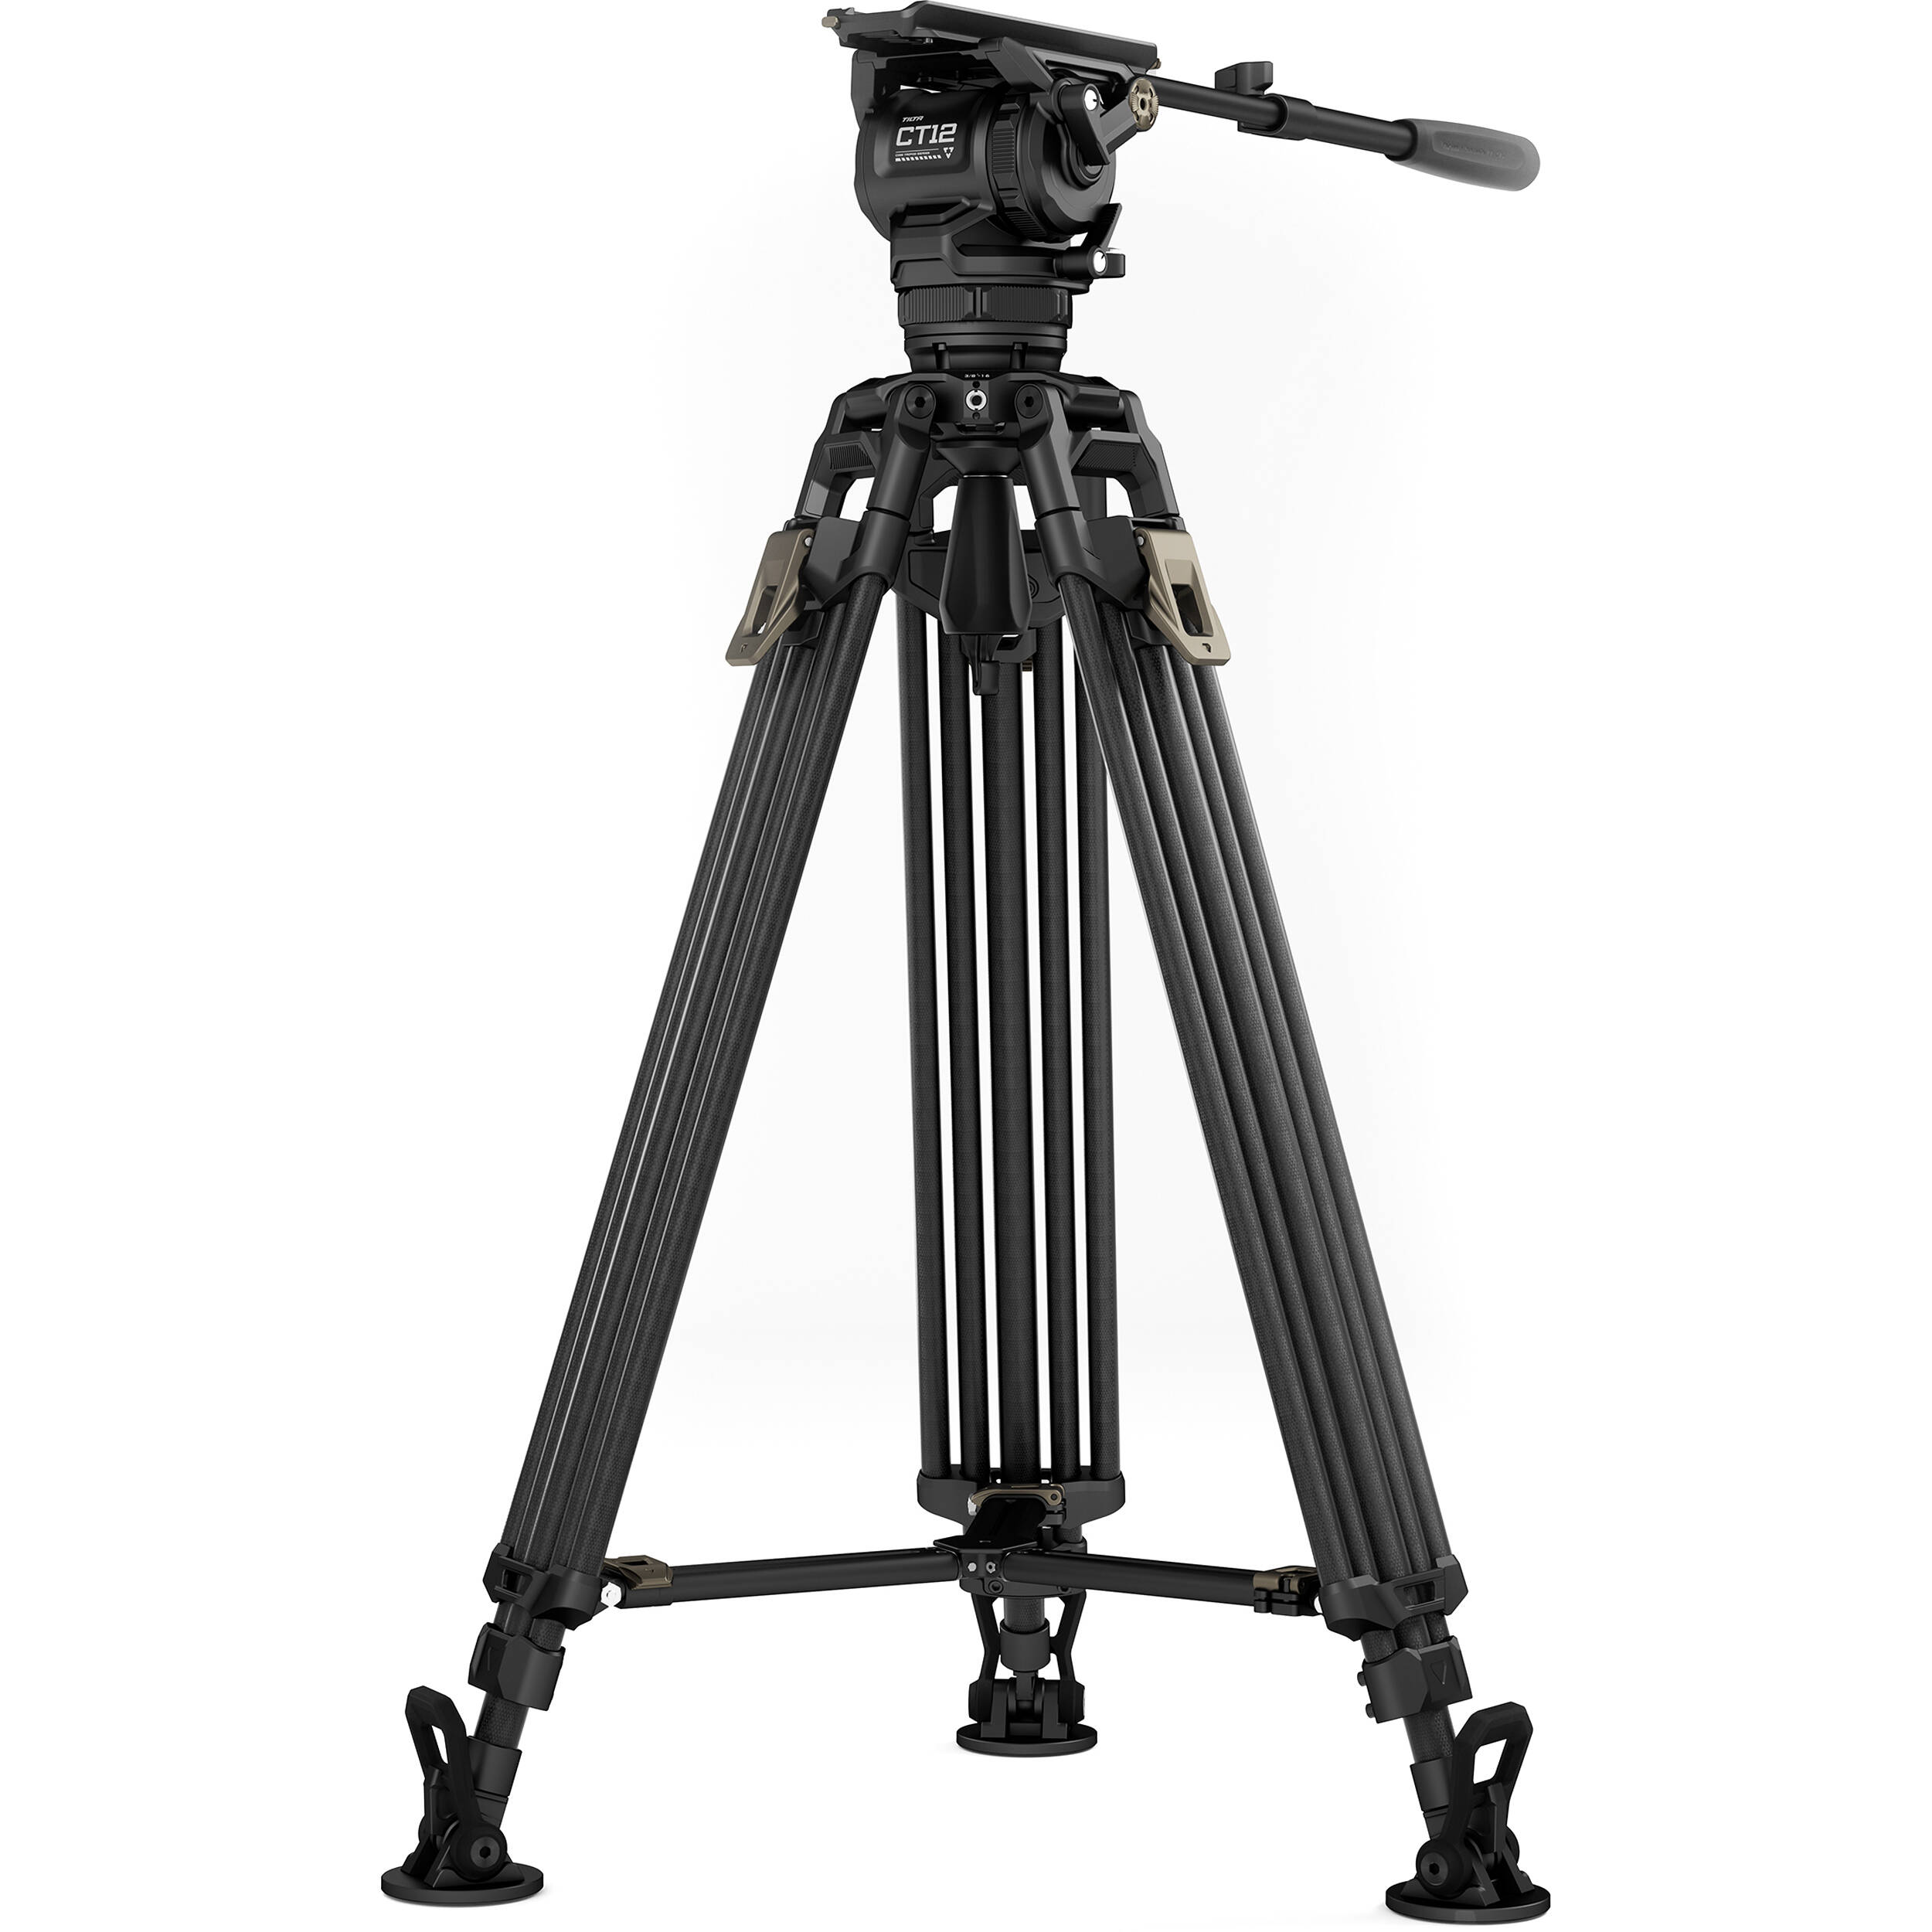 Tilta CT12 75mm Cine Fluid Head With 2-Stage One-Touch Carbon Fiber Tripod System